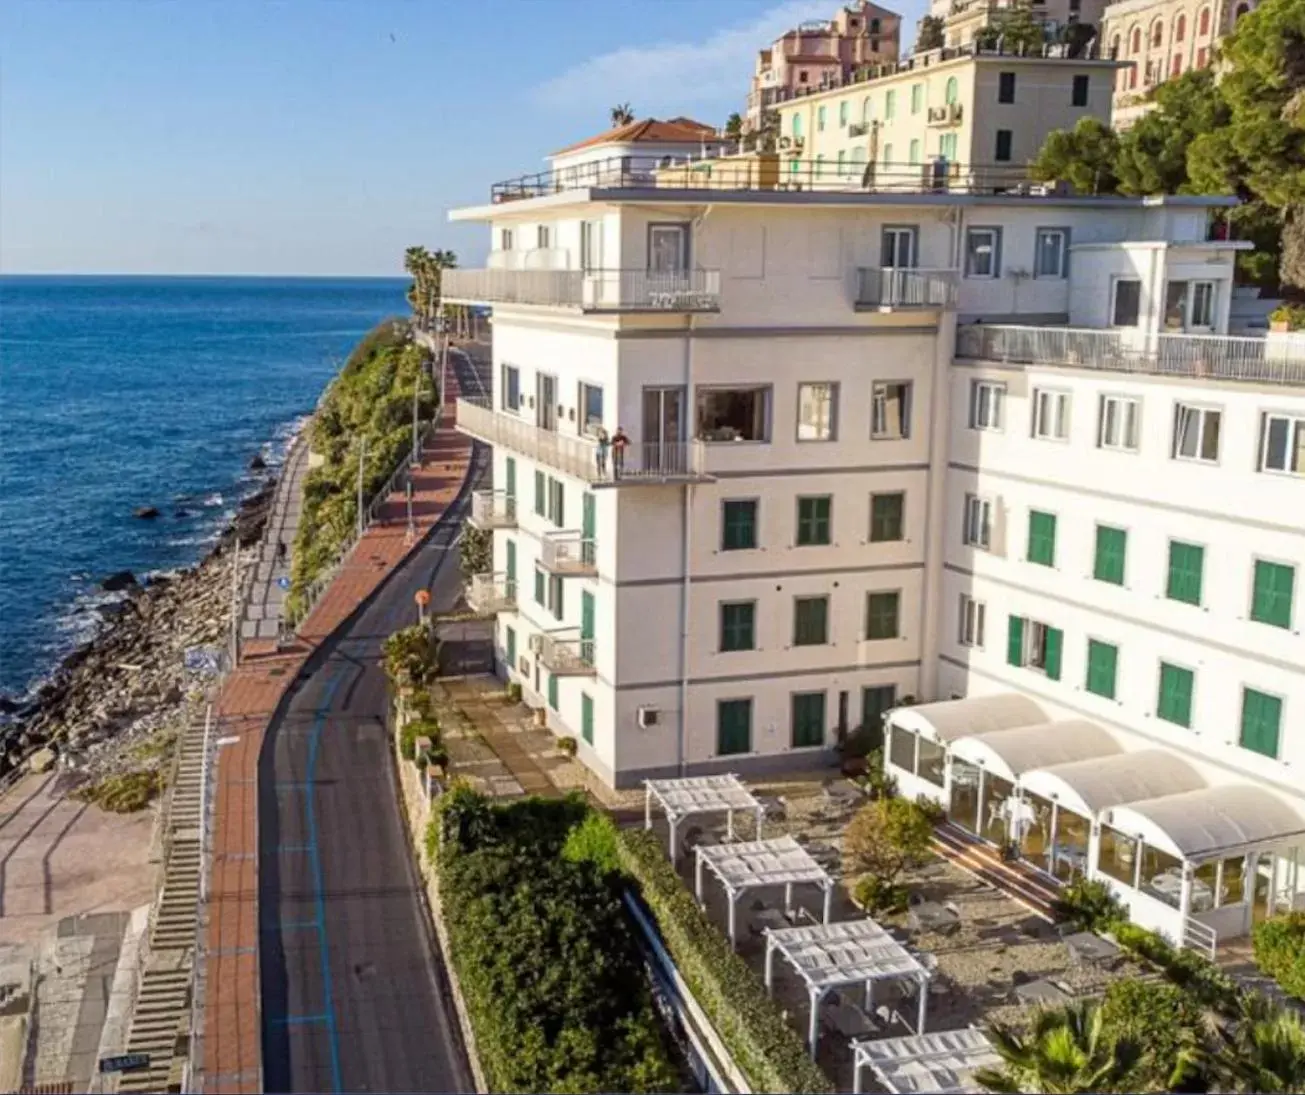 Property building, Bird's-eye View in Hotel Corallo